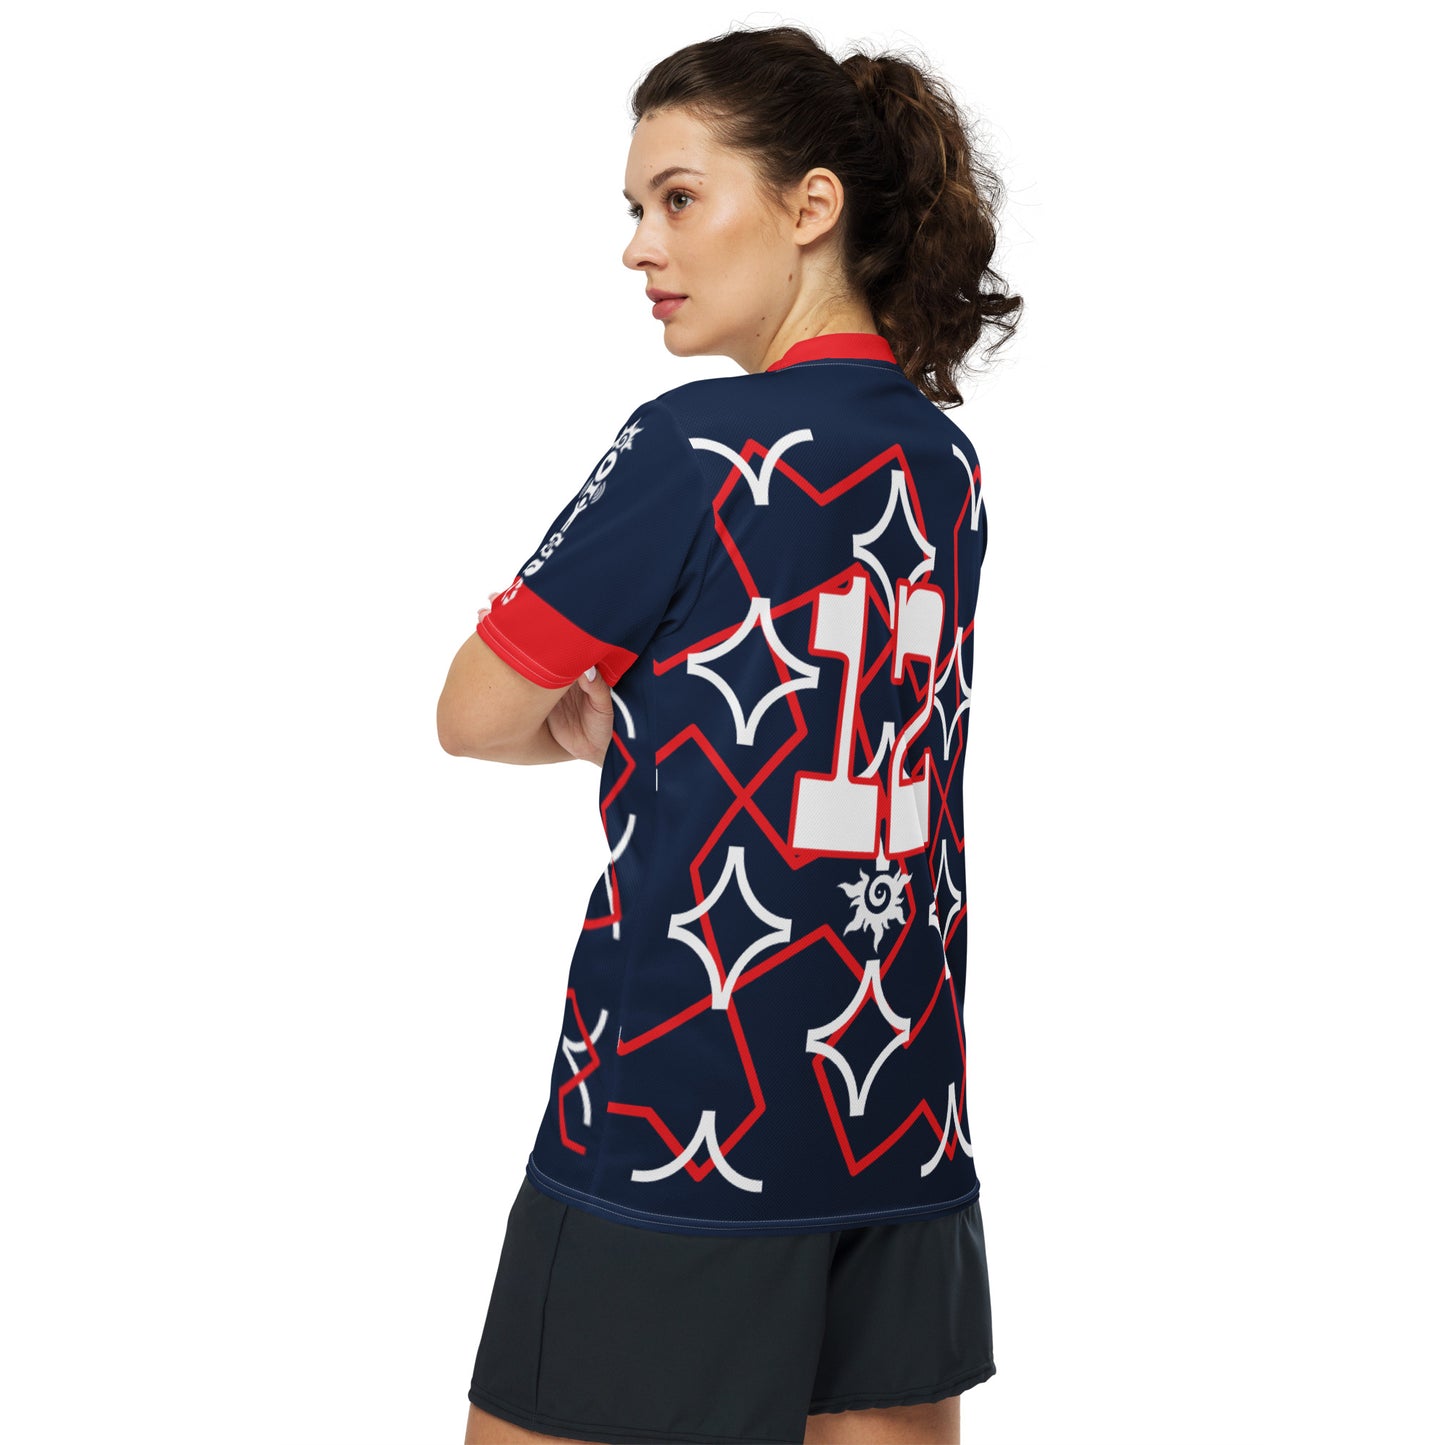 Recycled Unisex Sports Jersey ActSun 5